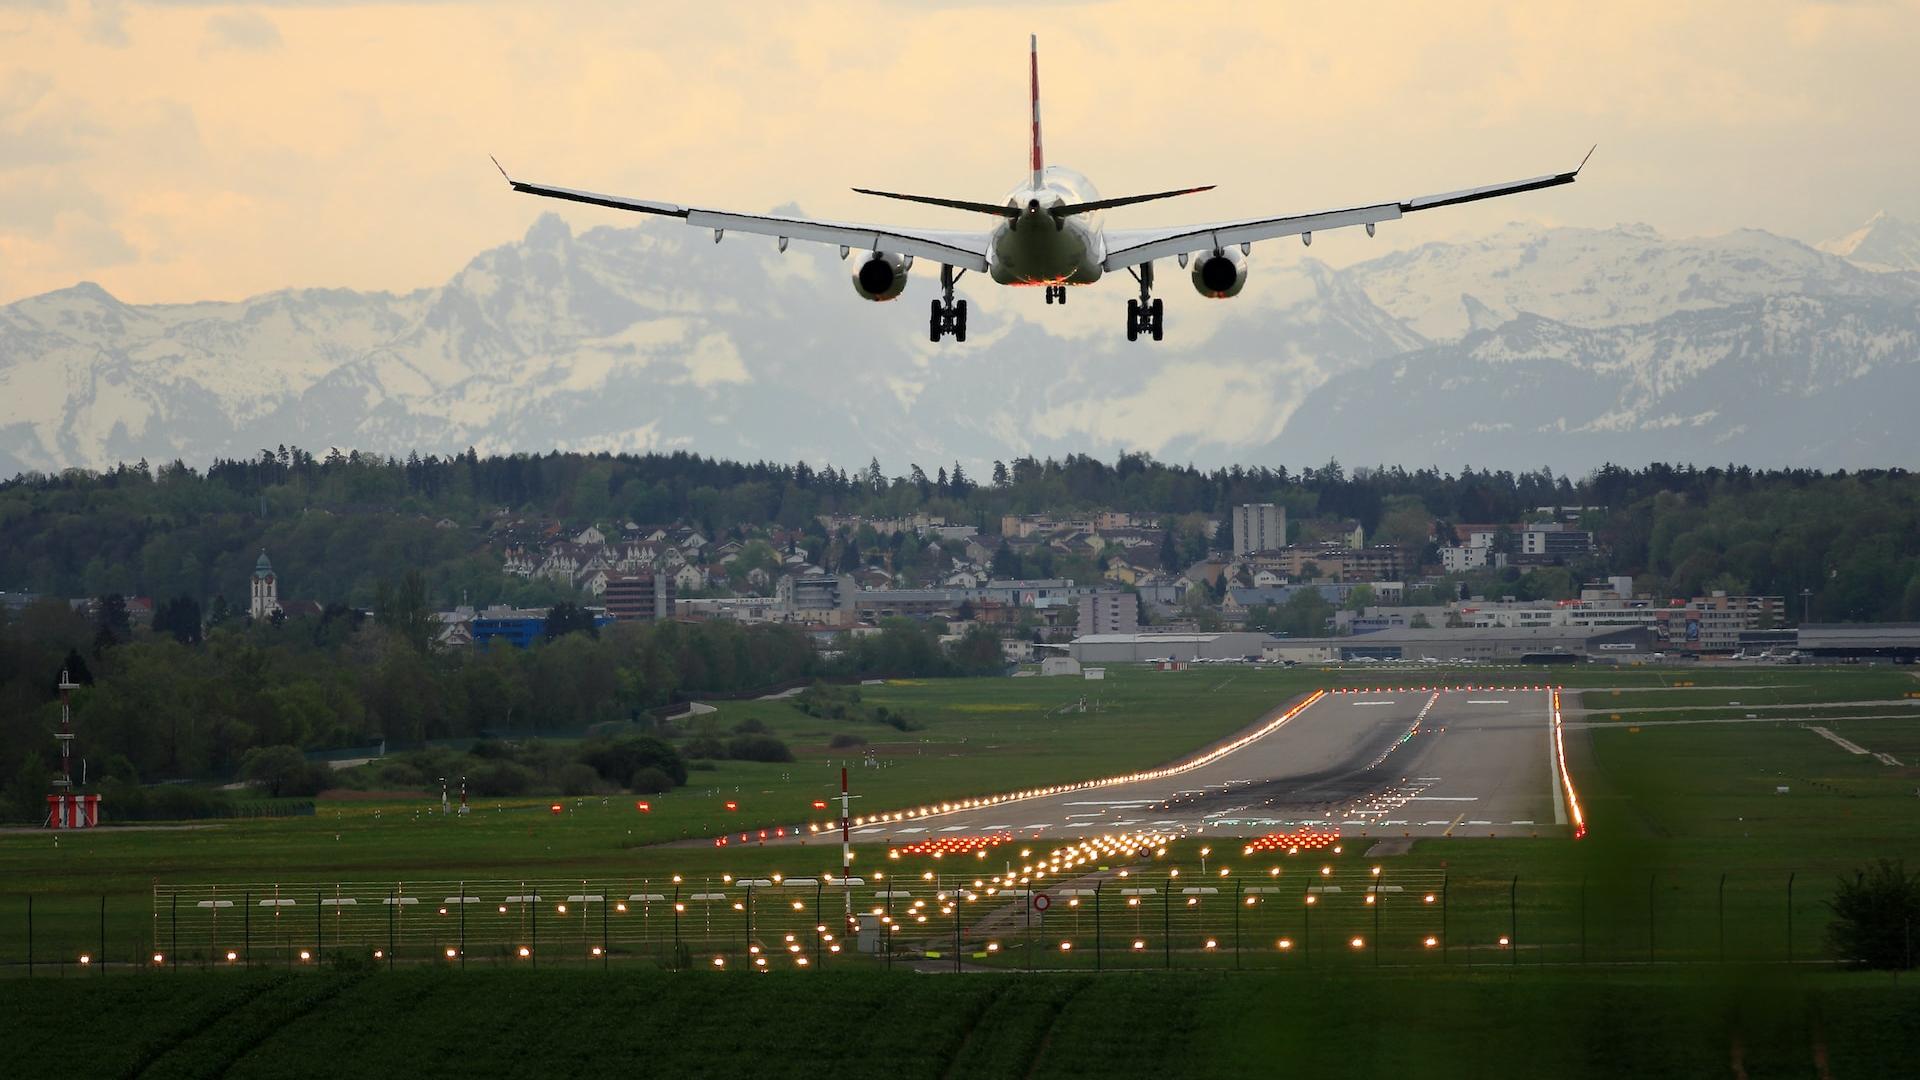 Runway and flight take-off